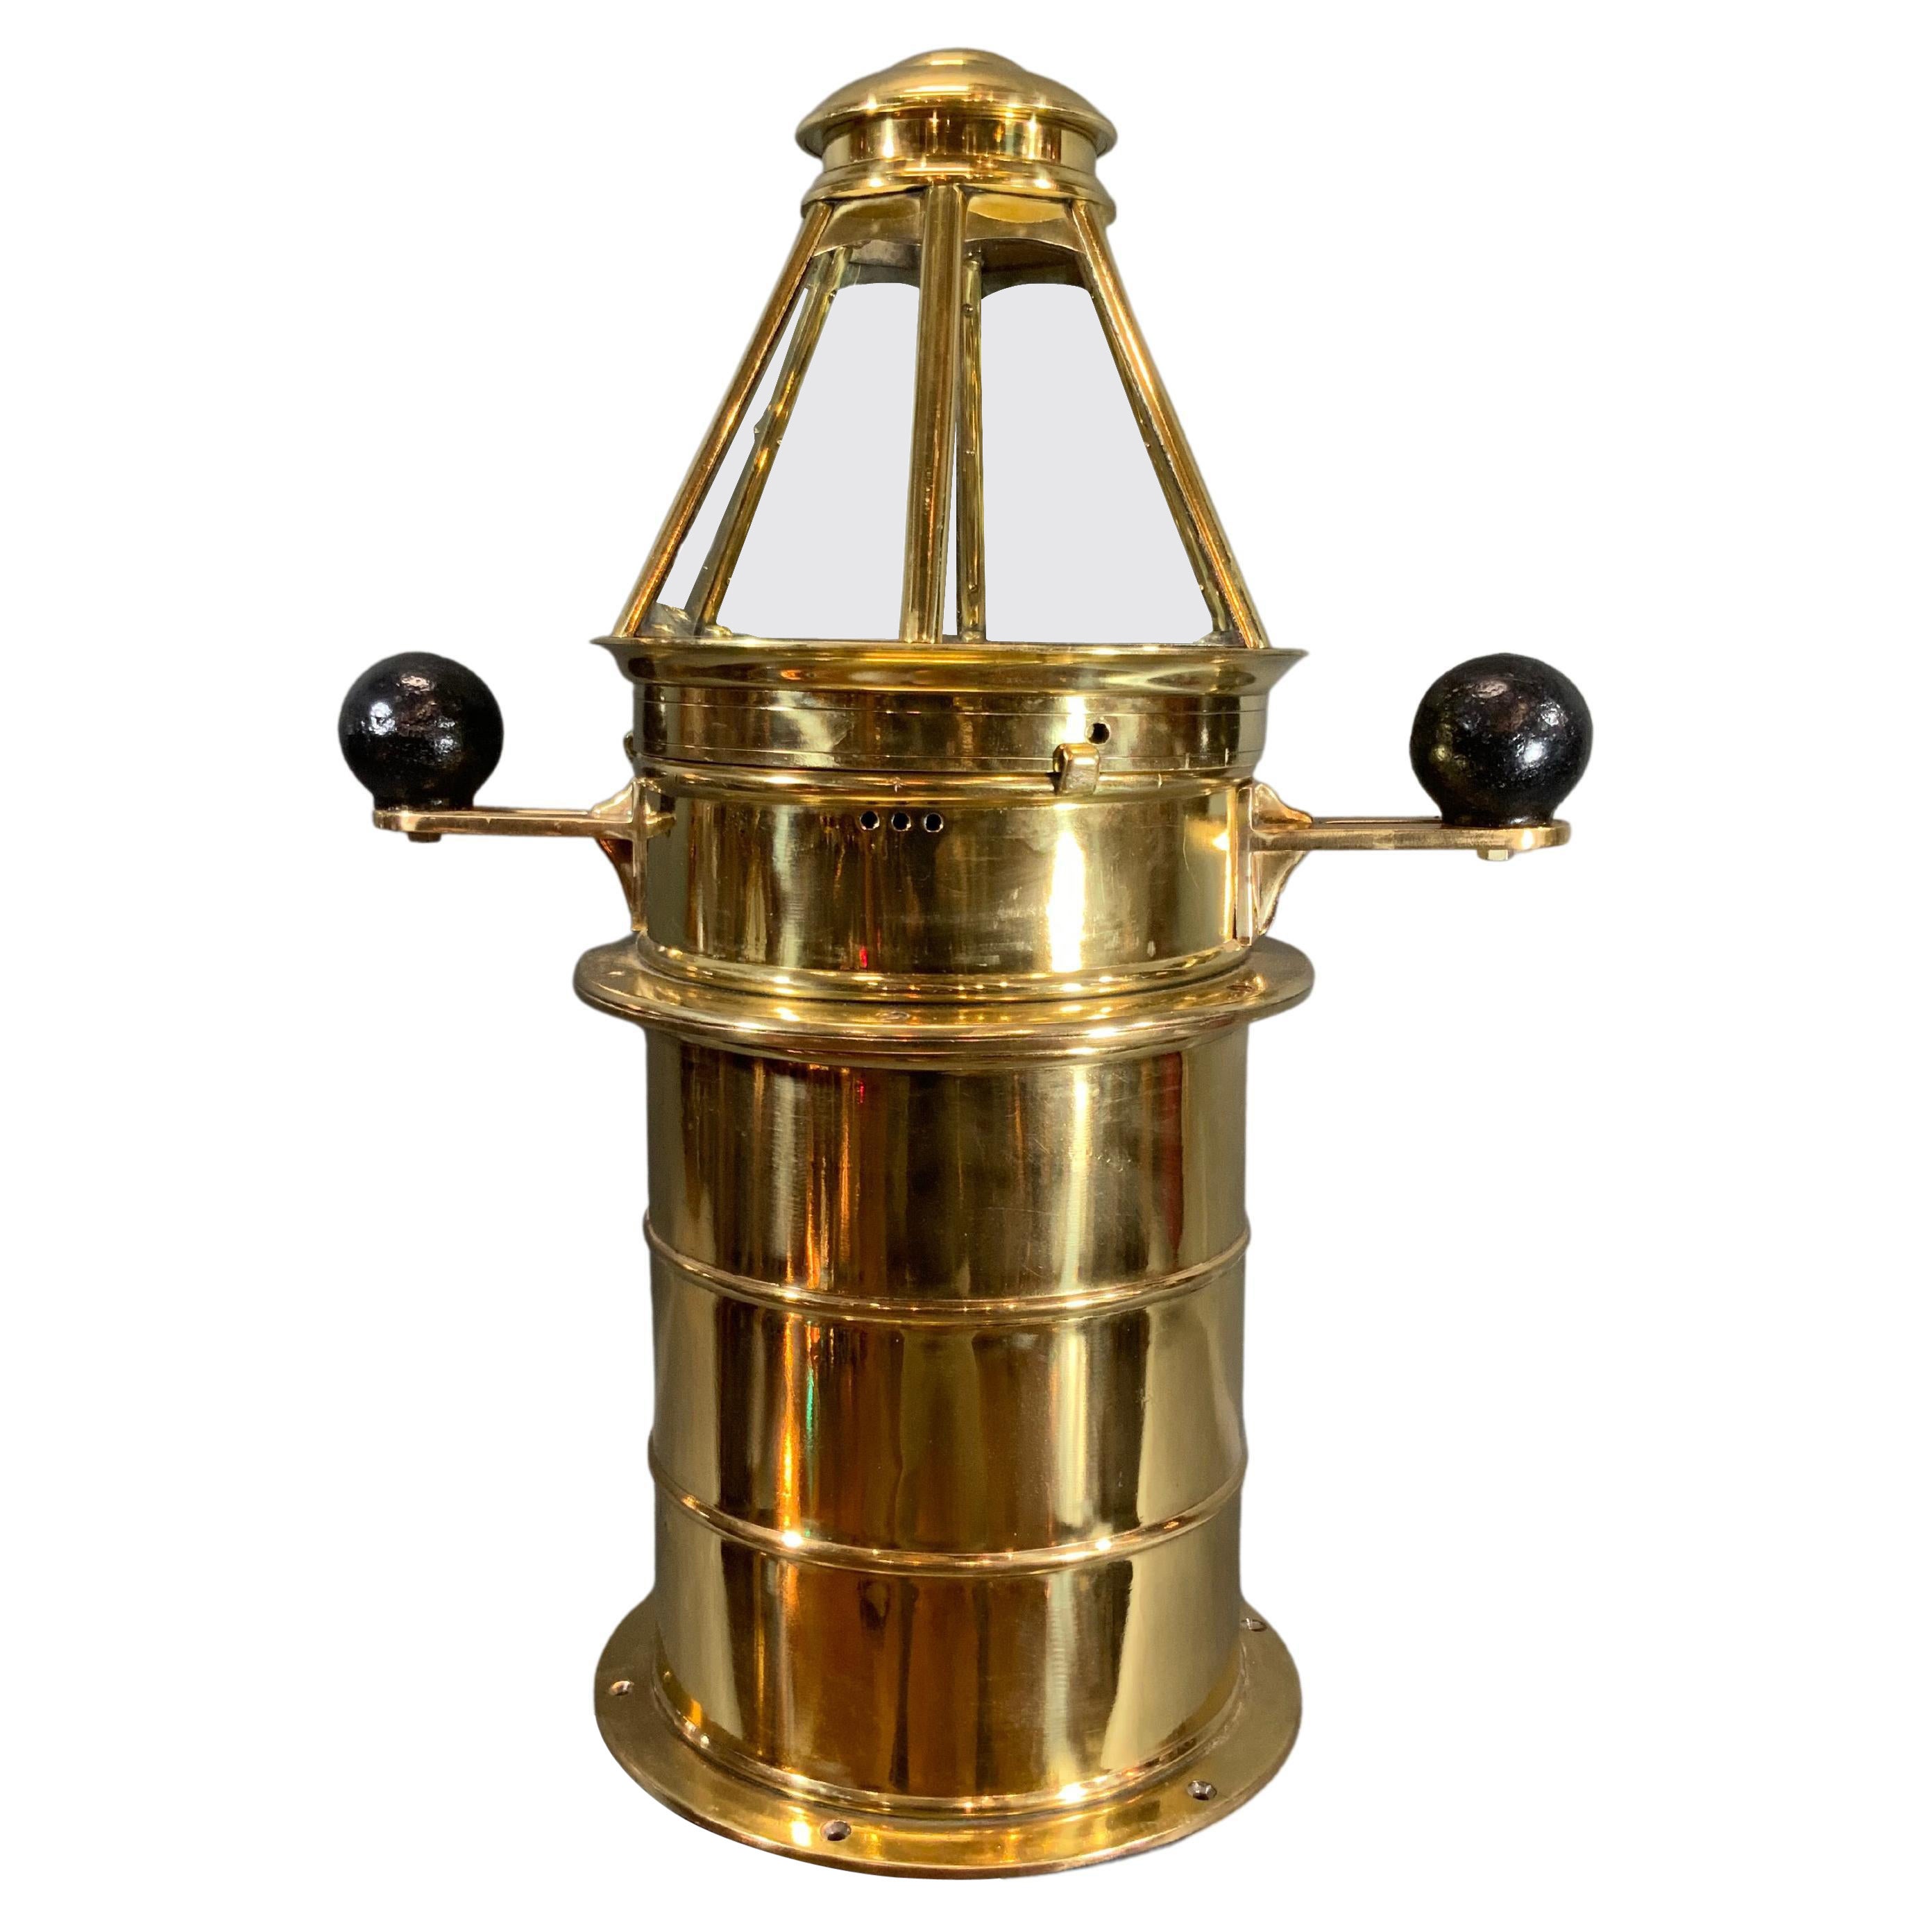 Outstanding Solid Brass Yacht Binnacle circa 1920 For Sale